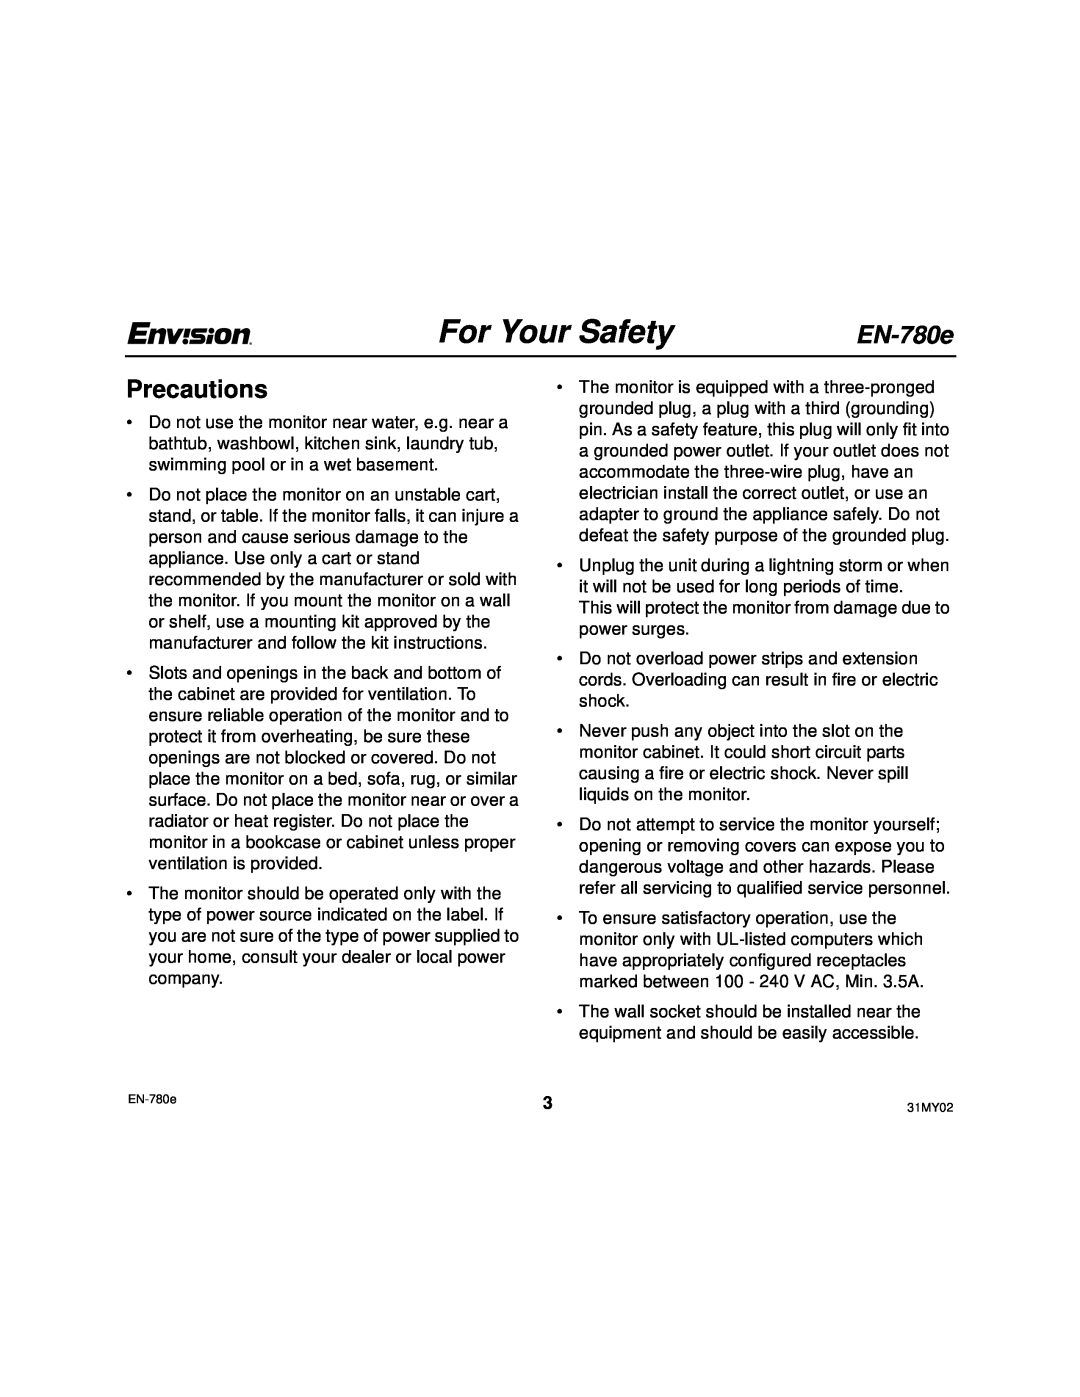 Envision Peripherals EN-780e user manual Precautions, For Your Safety 